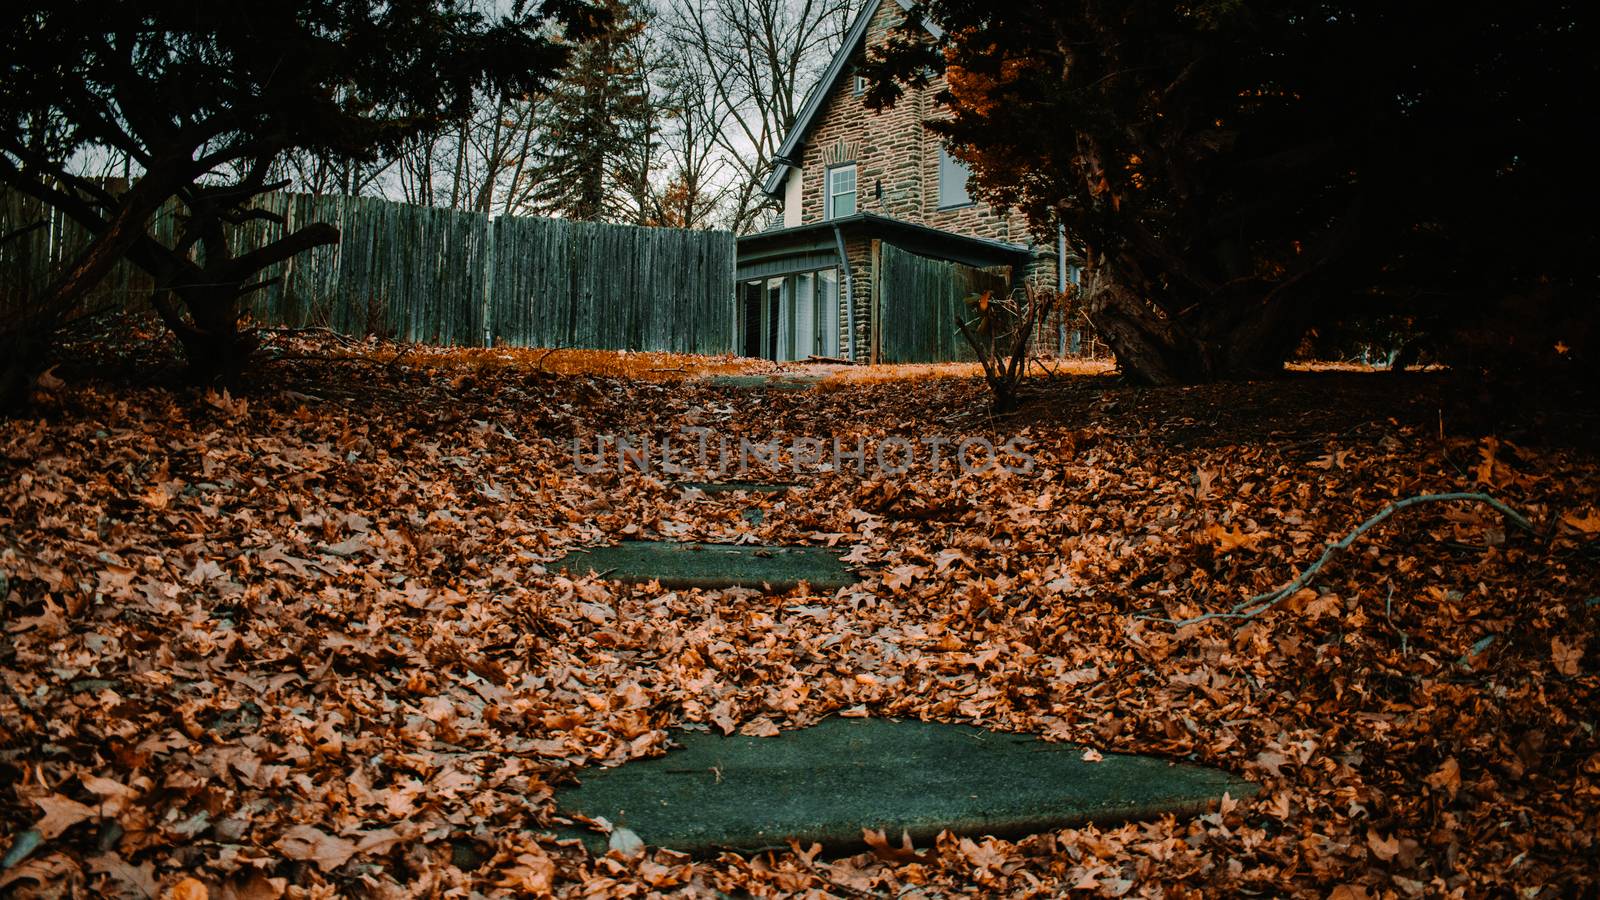 A Path Covered in Leaves Leading Up to a Hole in a Fence that le by bju12290